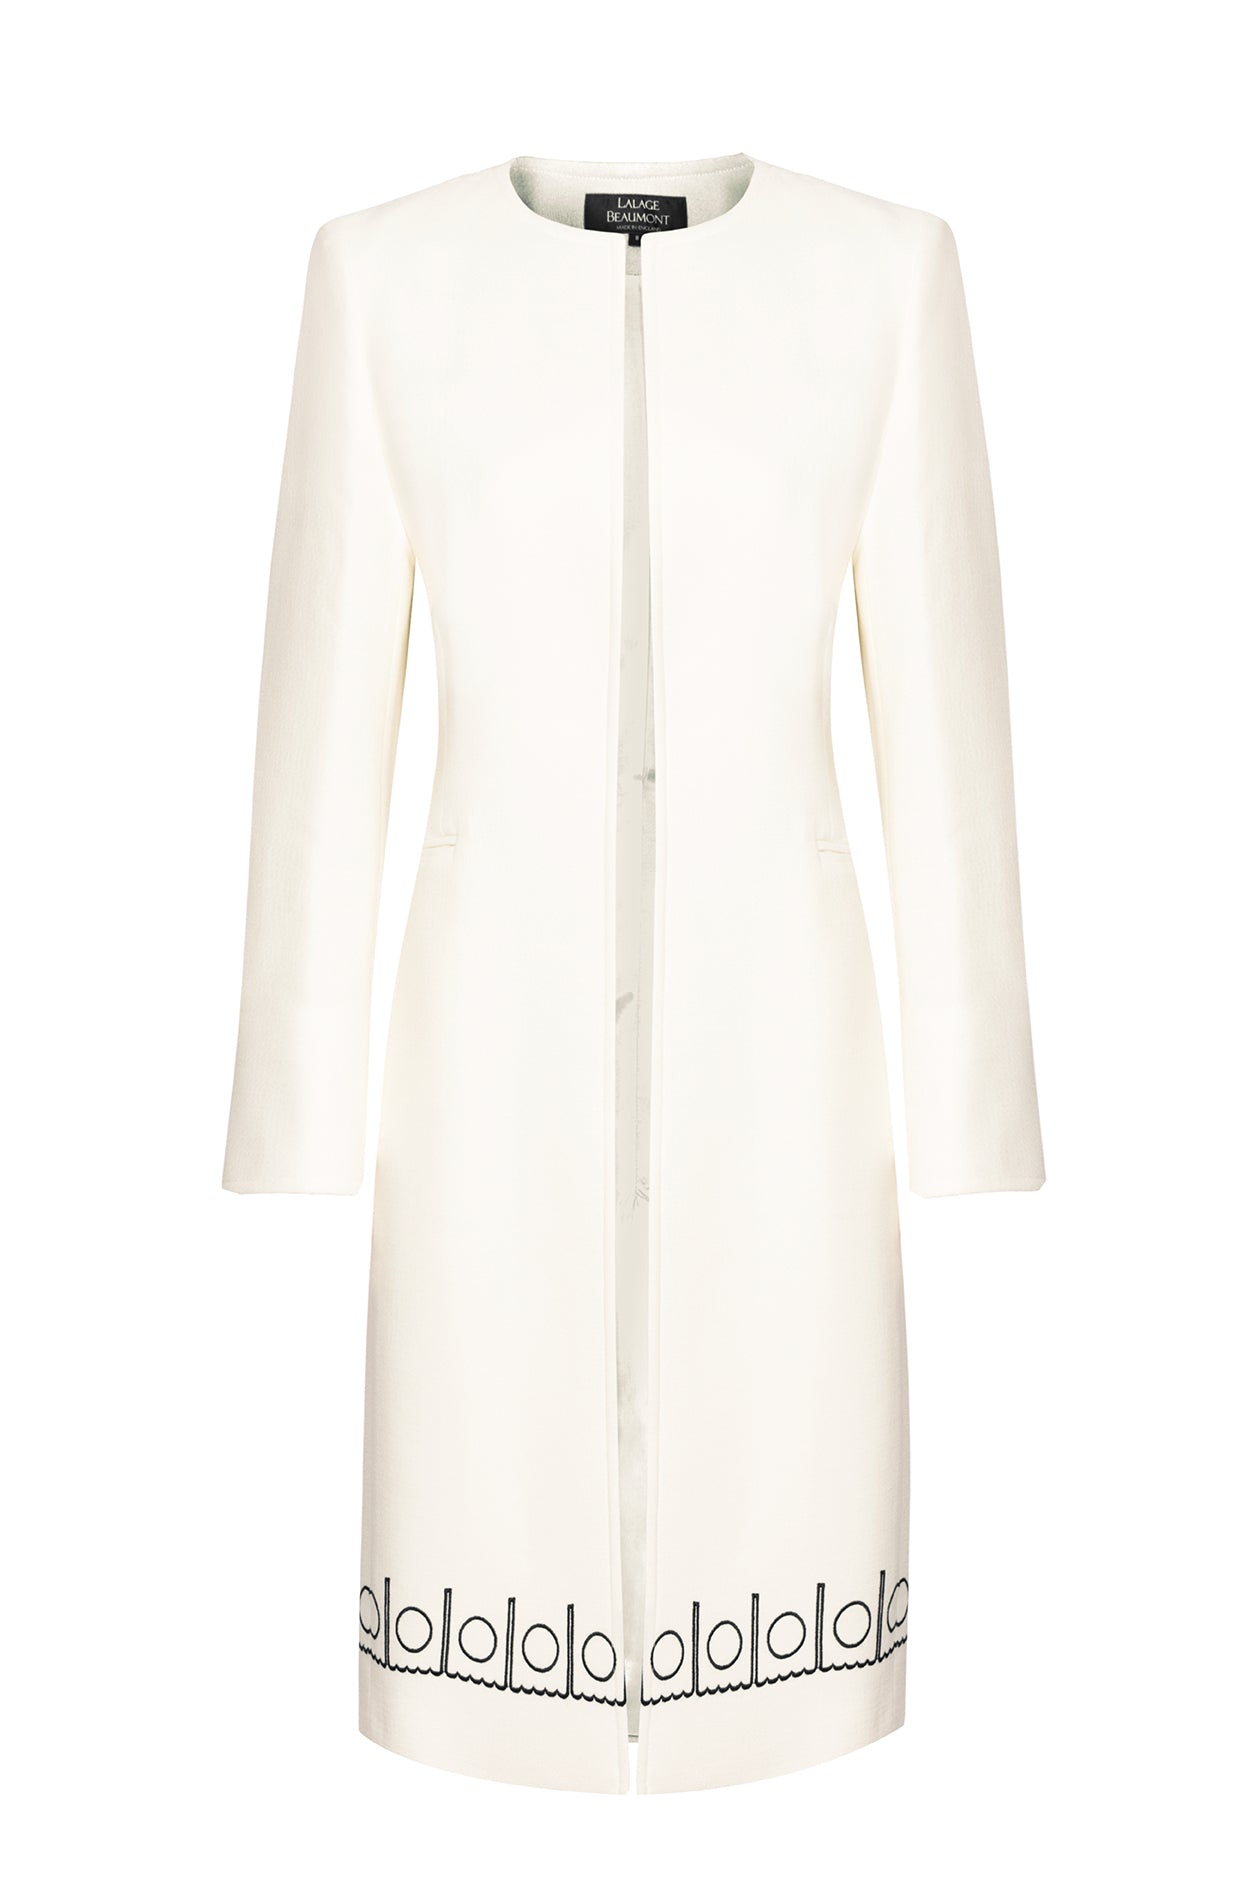 Ivory Faille Dress Coat with Black Embroidery - Vanya